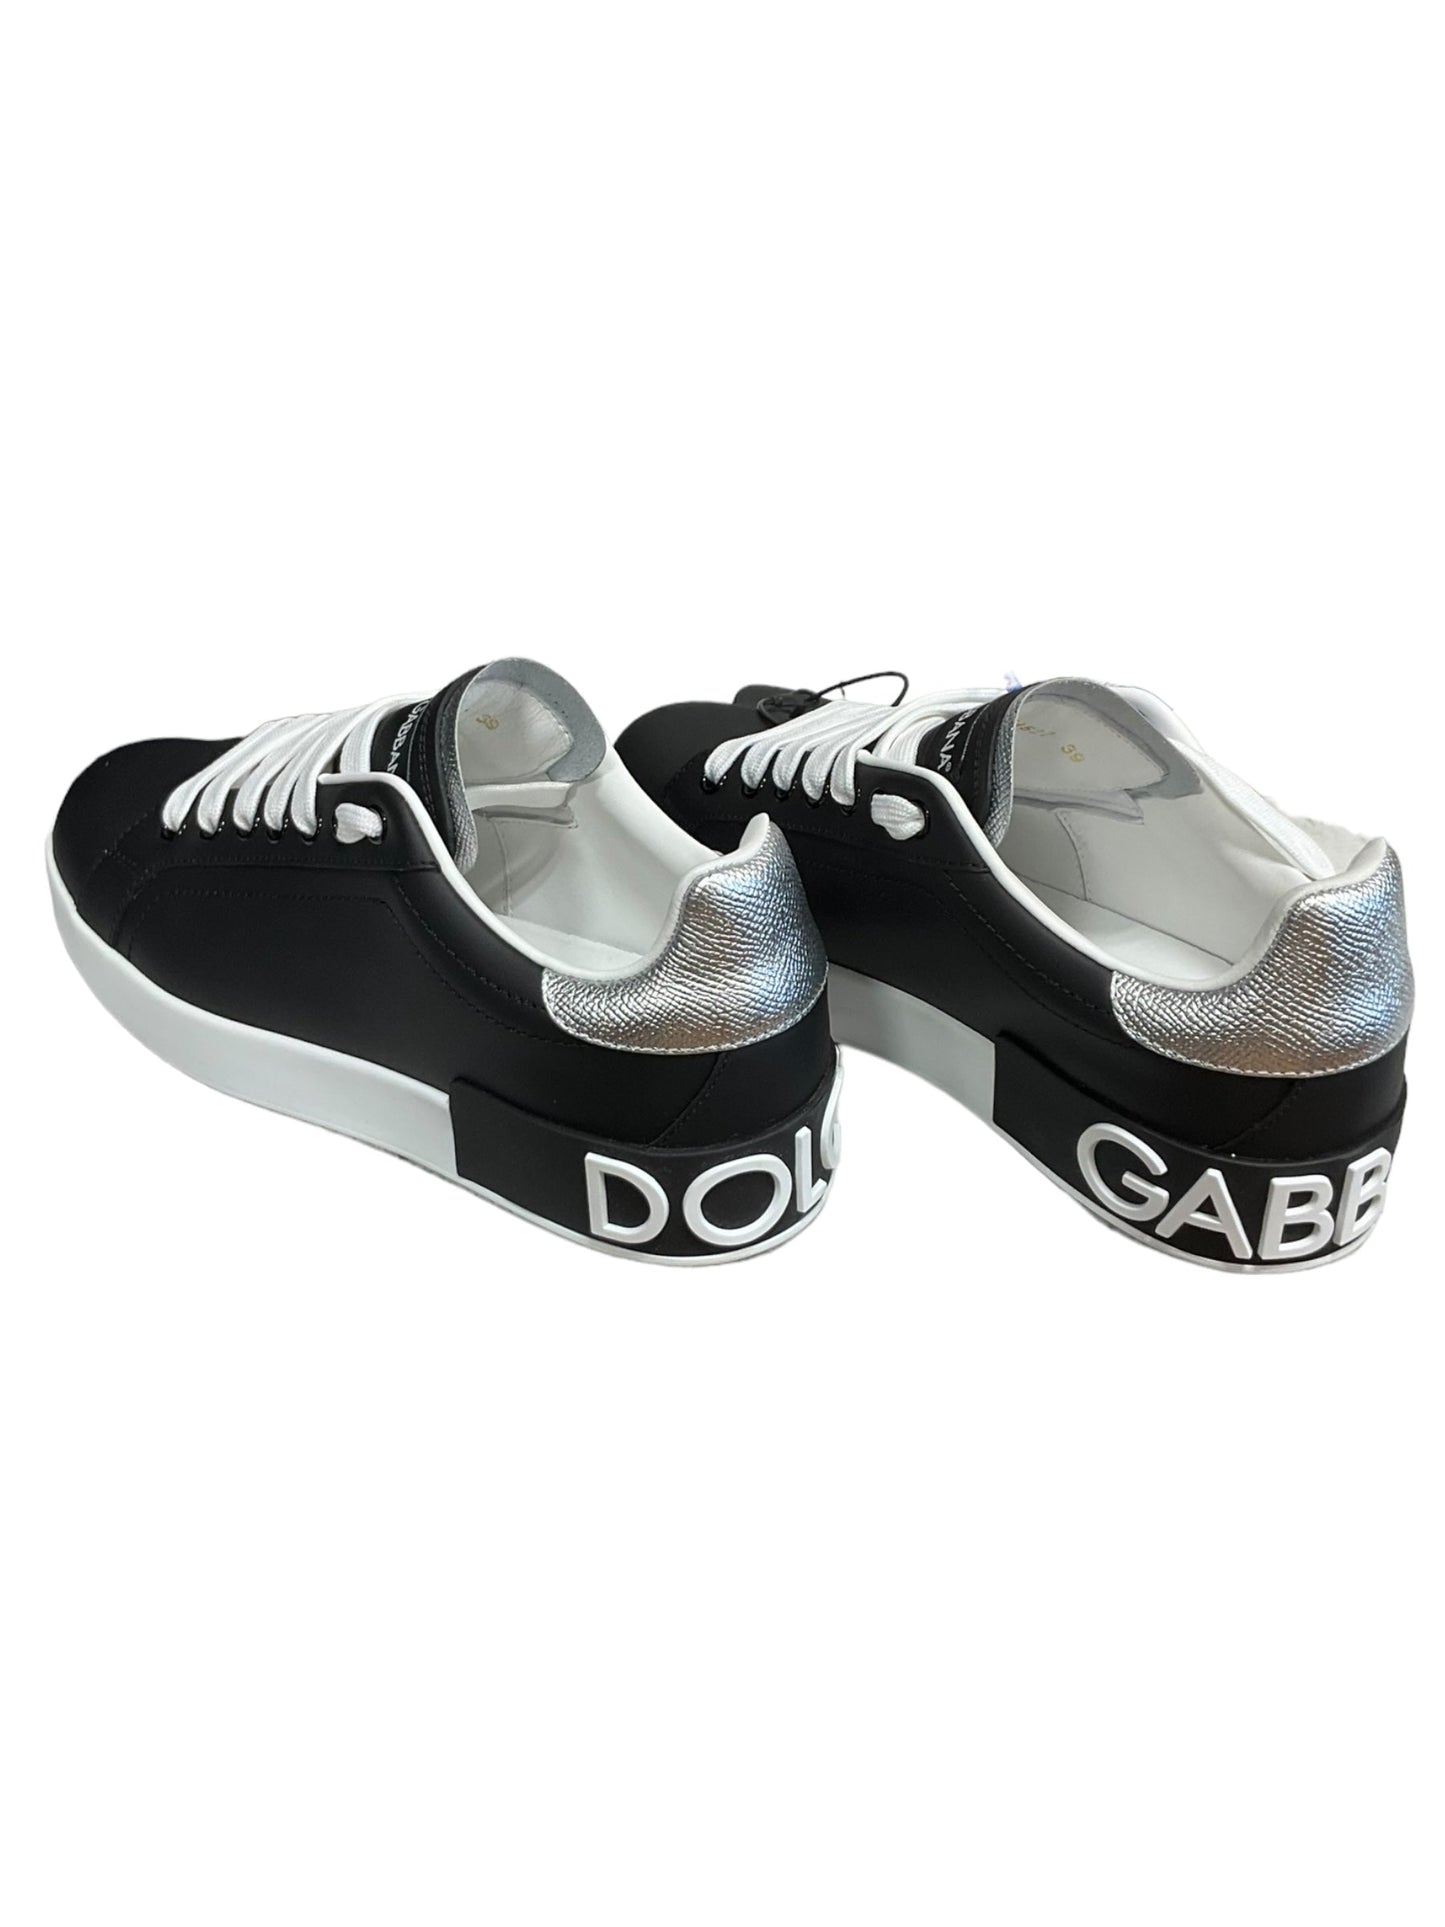 Shoes Luxury Designer By Dolce And Gabbana  Size: 8.5